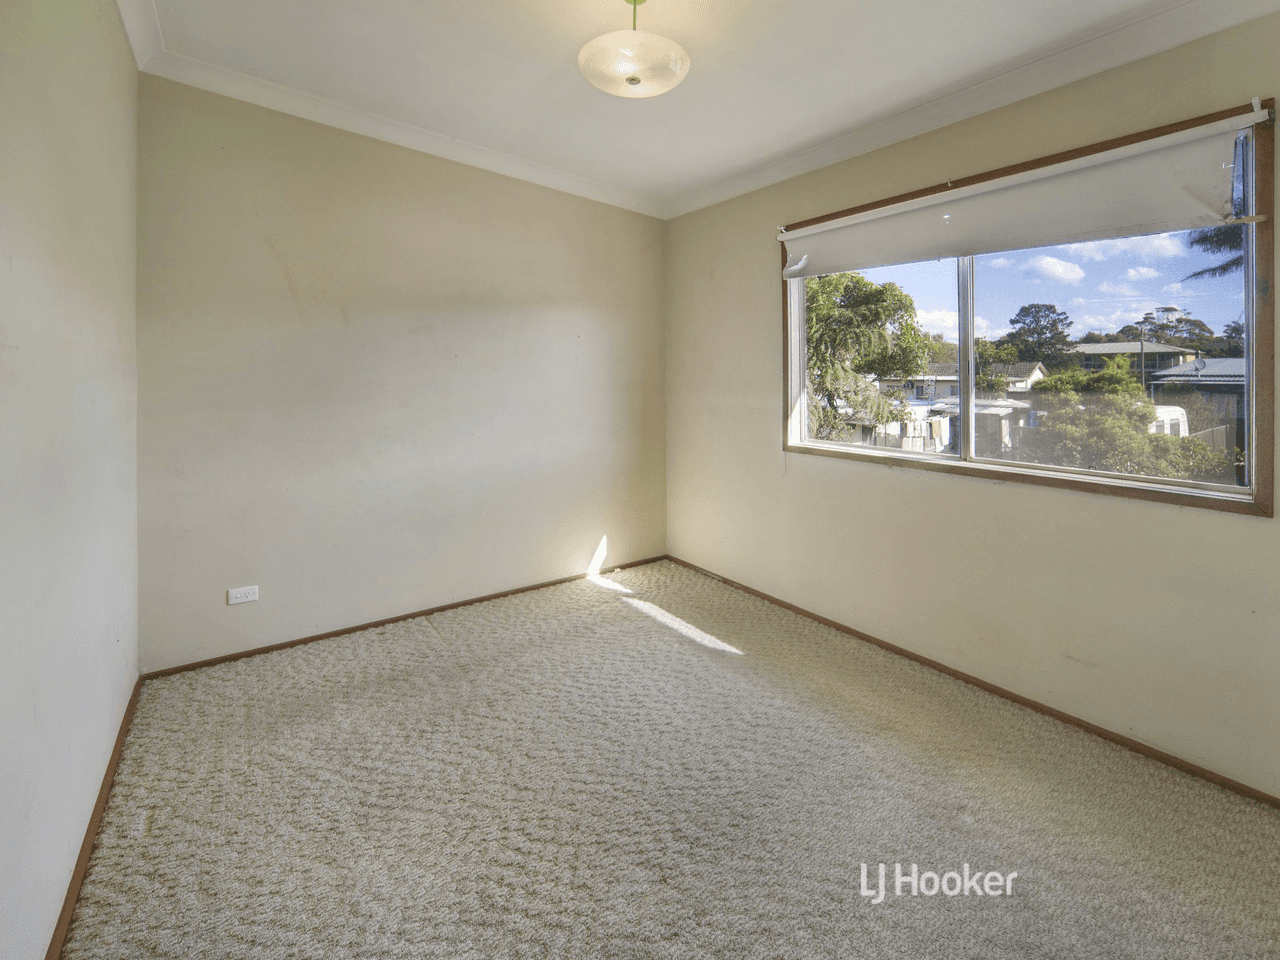 86 Adelaide Street, GREENWELL POINT, NSW 2540